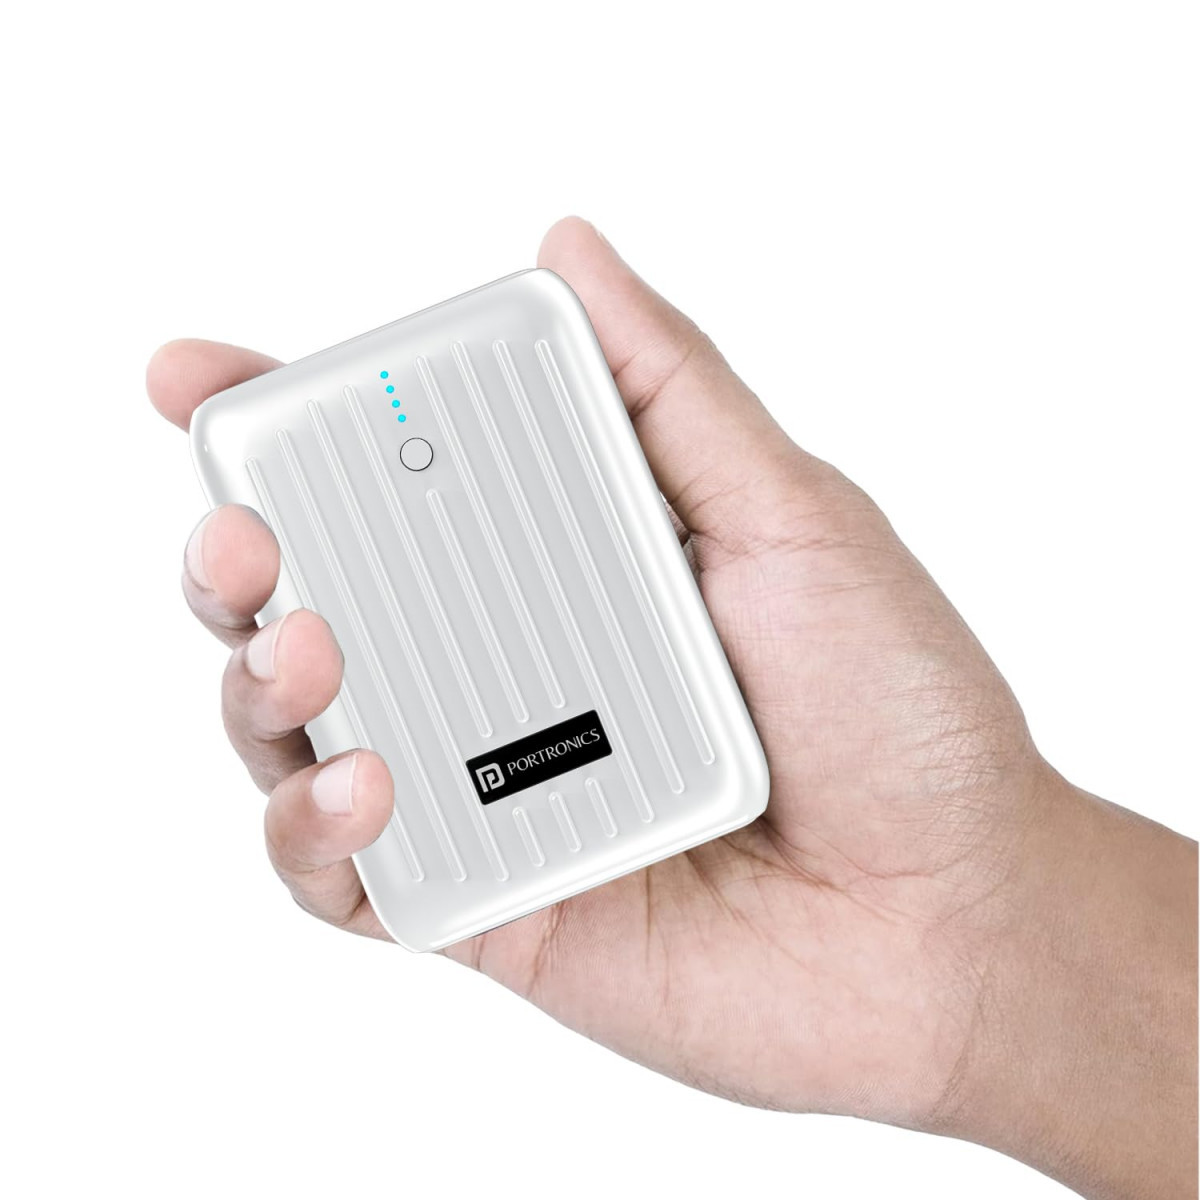 Portronics Zapcell 10K Advanced 10000 mAh Smallest Power Bank with 225W Max Output LED Indicator